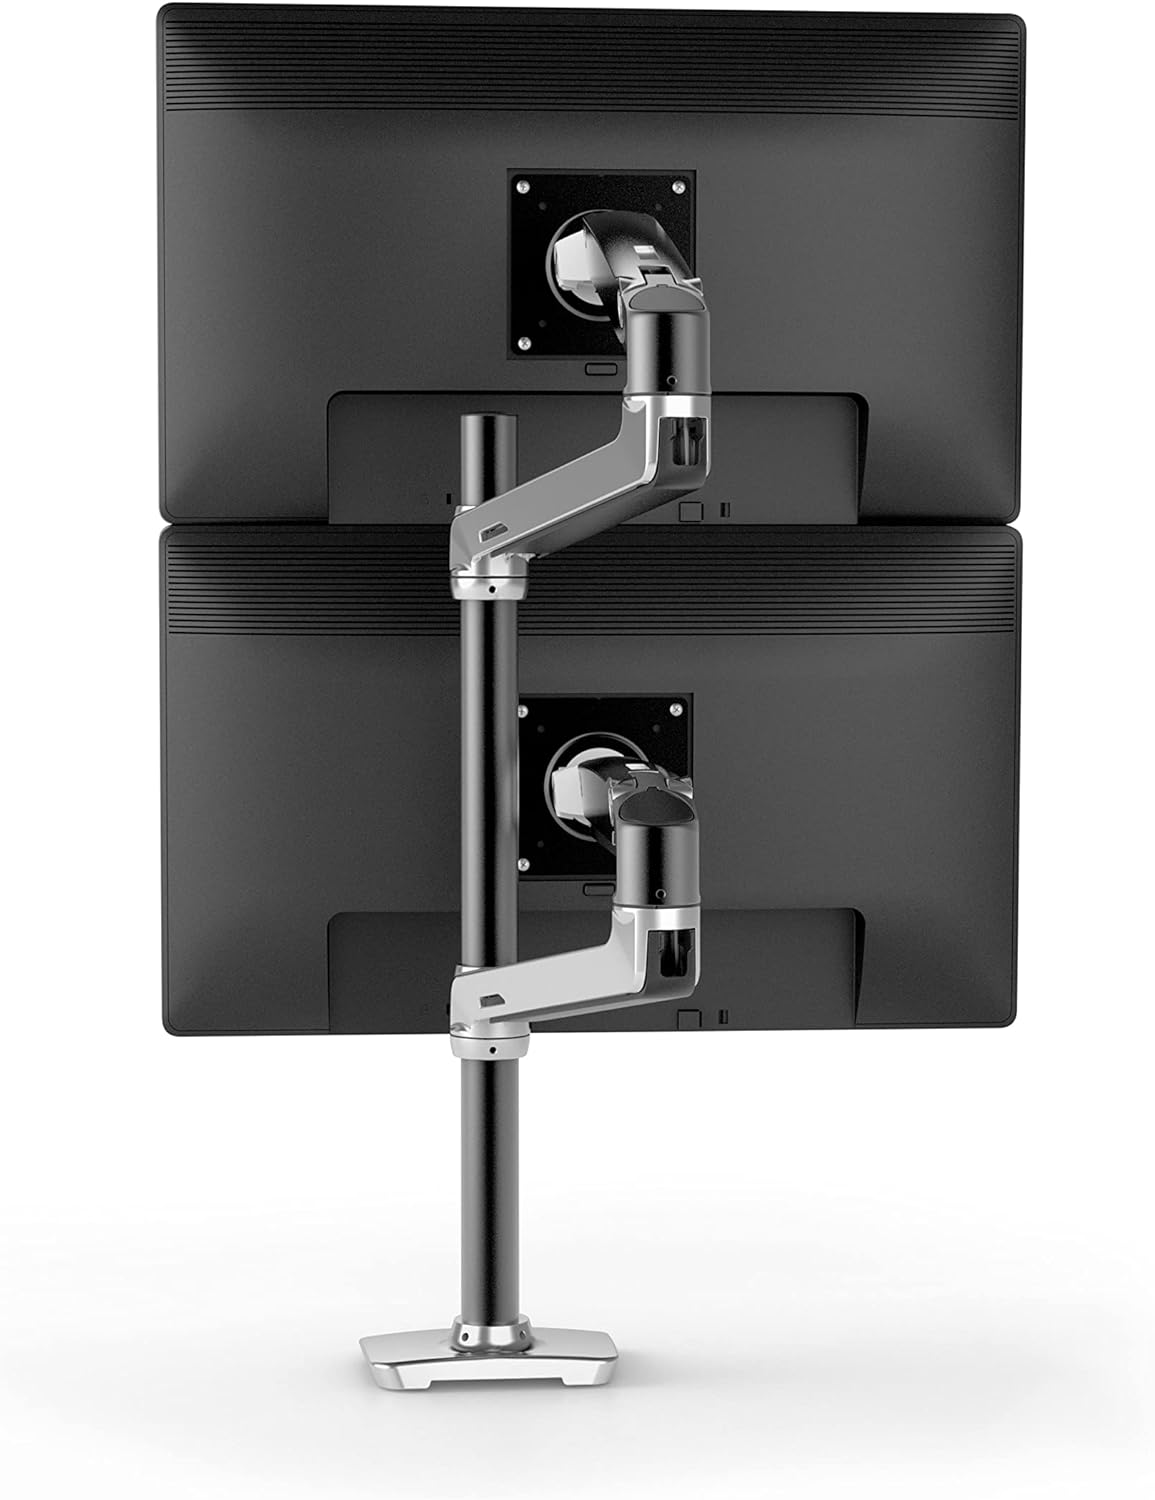 Ergotron LX Dual Desk Mount Stacking Arm for Displays up to 40" (Polished Aluminum)